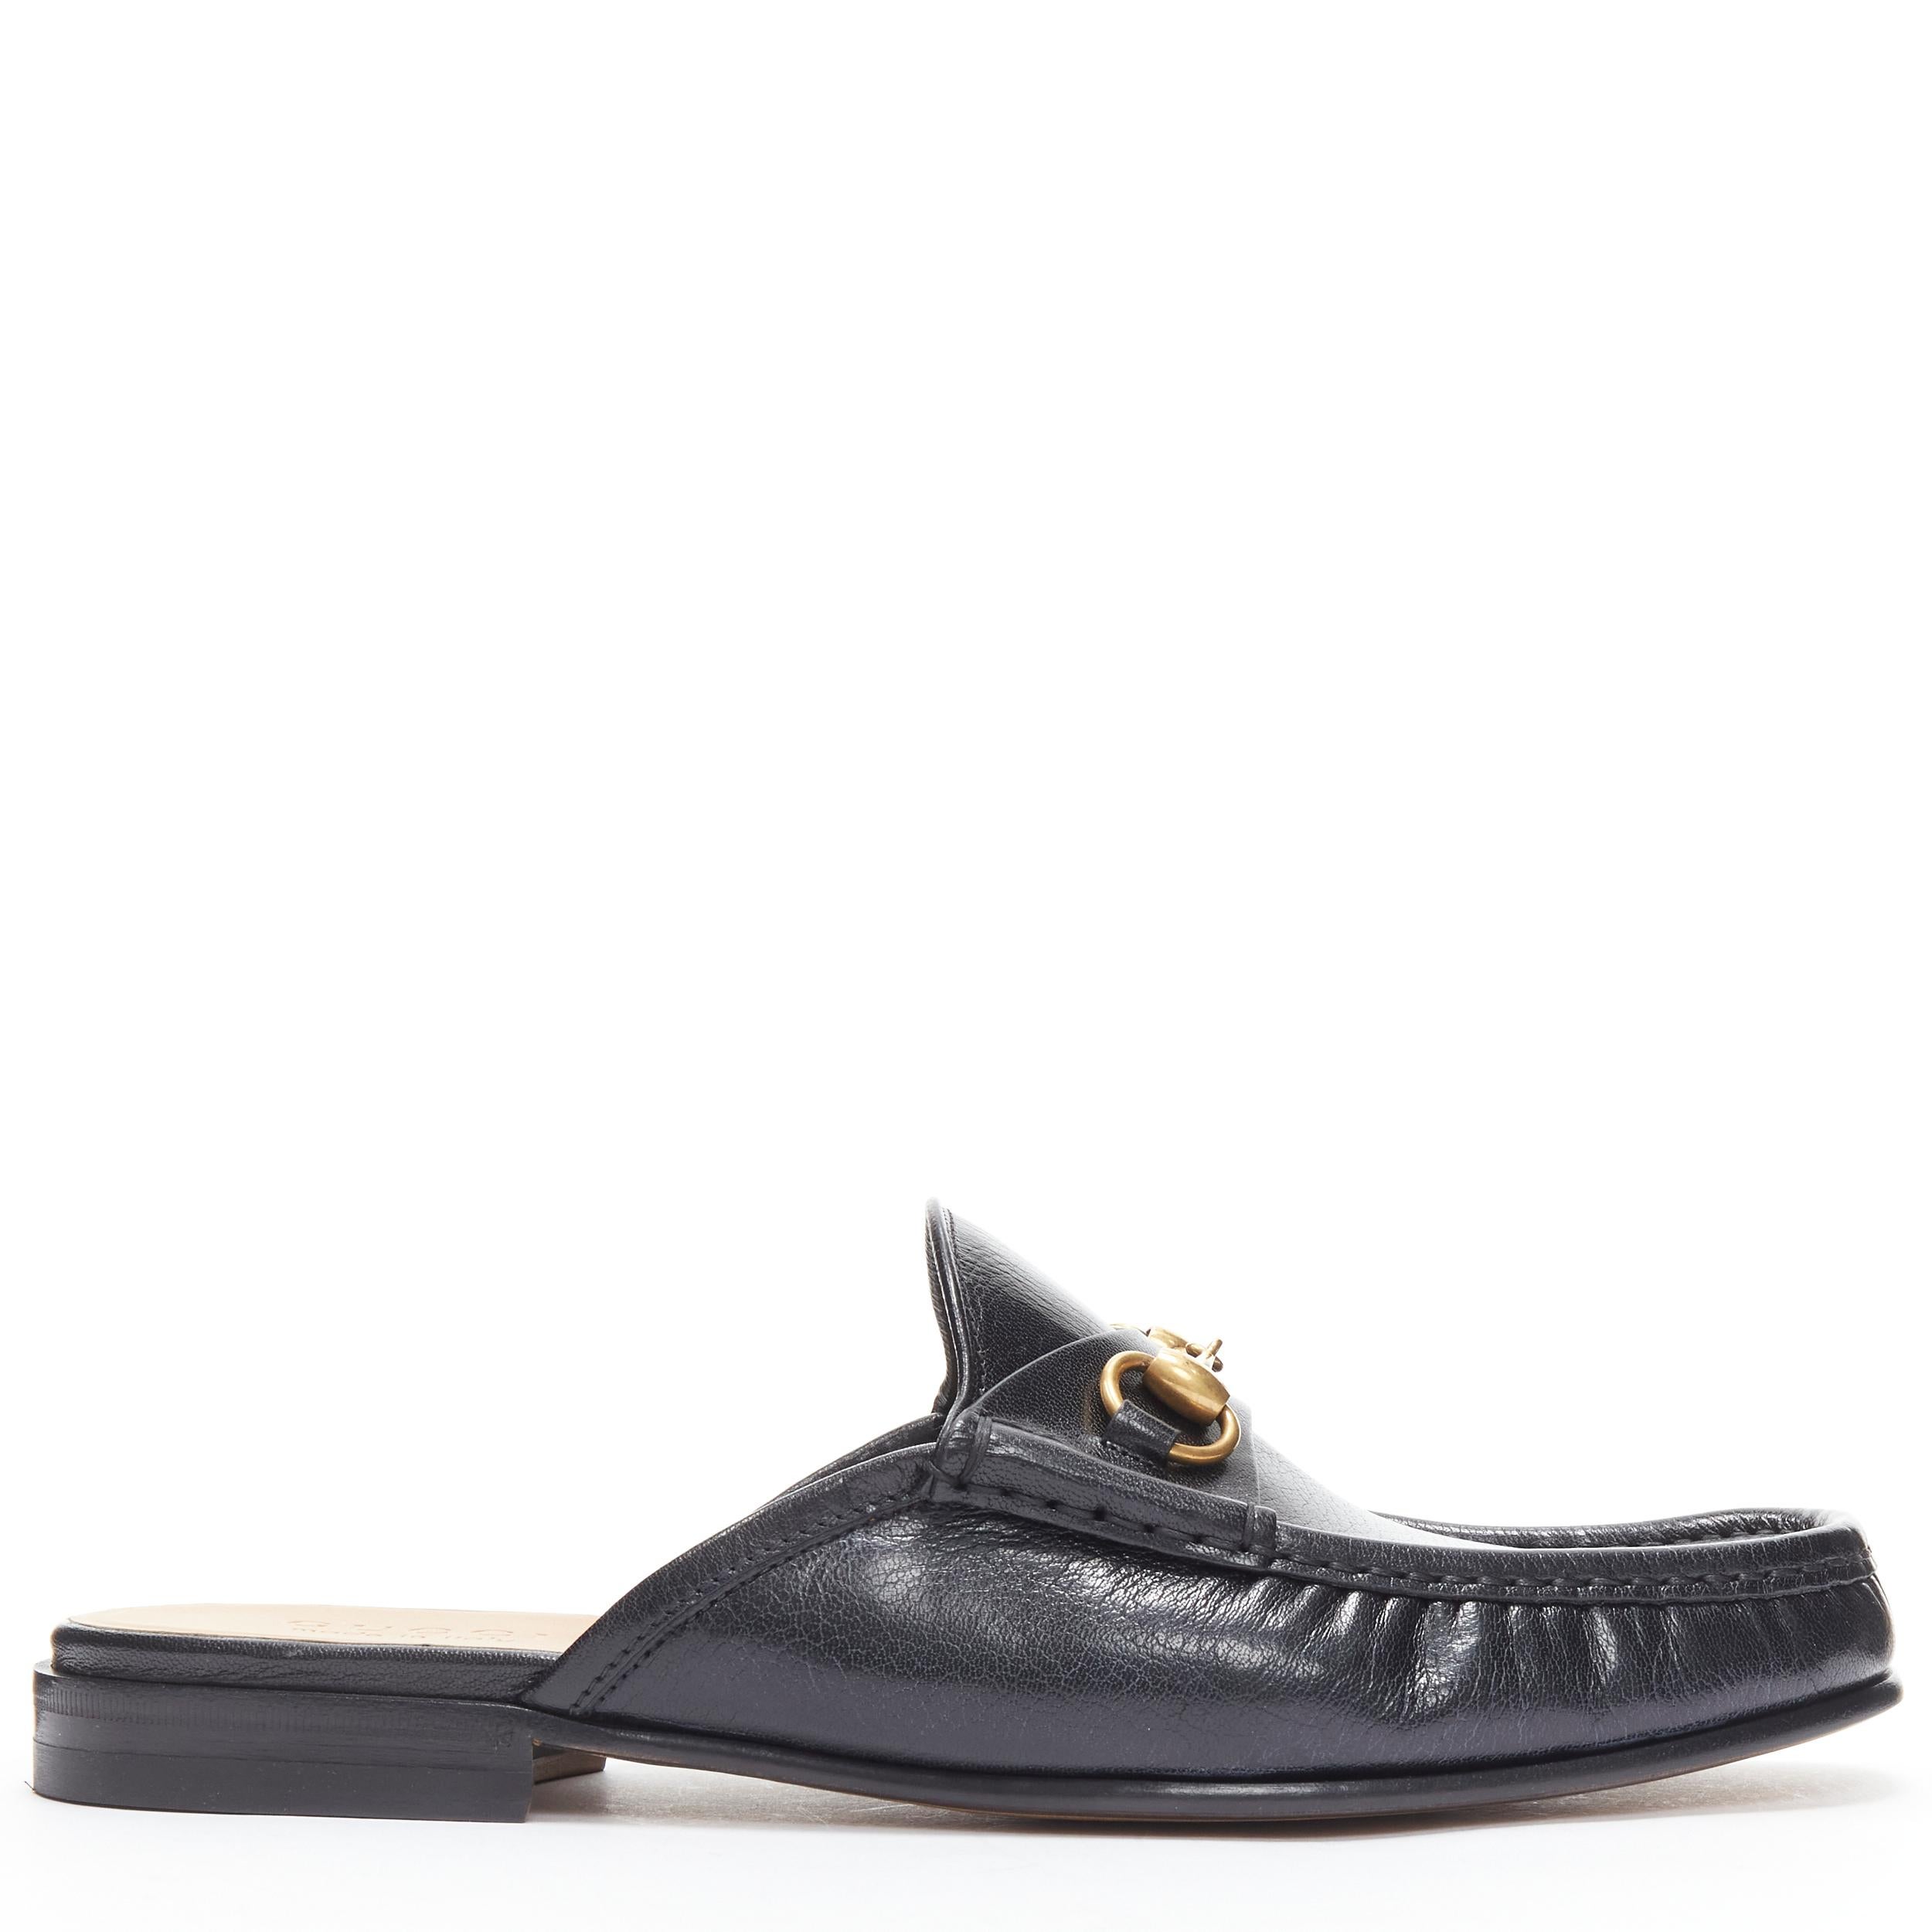 new GUCCI Quentin Nero black leather gold Horsebit slip on loafer UK11 US12 EU45 
Reference: TGAS/B02148 
Brand: Gucci 
Designer: Alessandro Michele 
Model: Quentin 
Material: Leather 
Color: Black 
Pattern: Solid 
Extra Detail: Quentin. Black